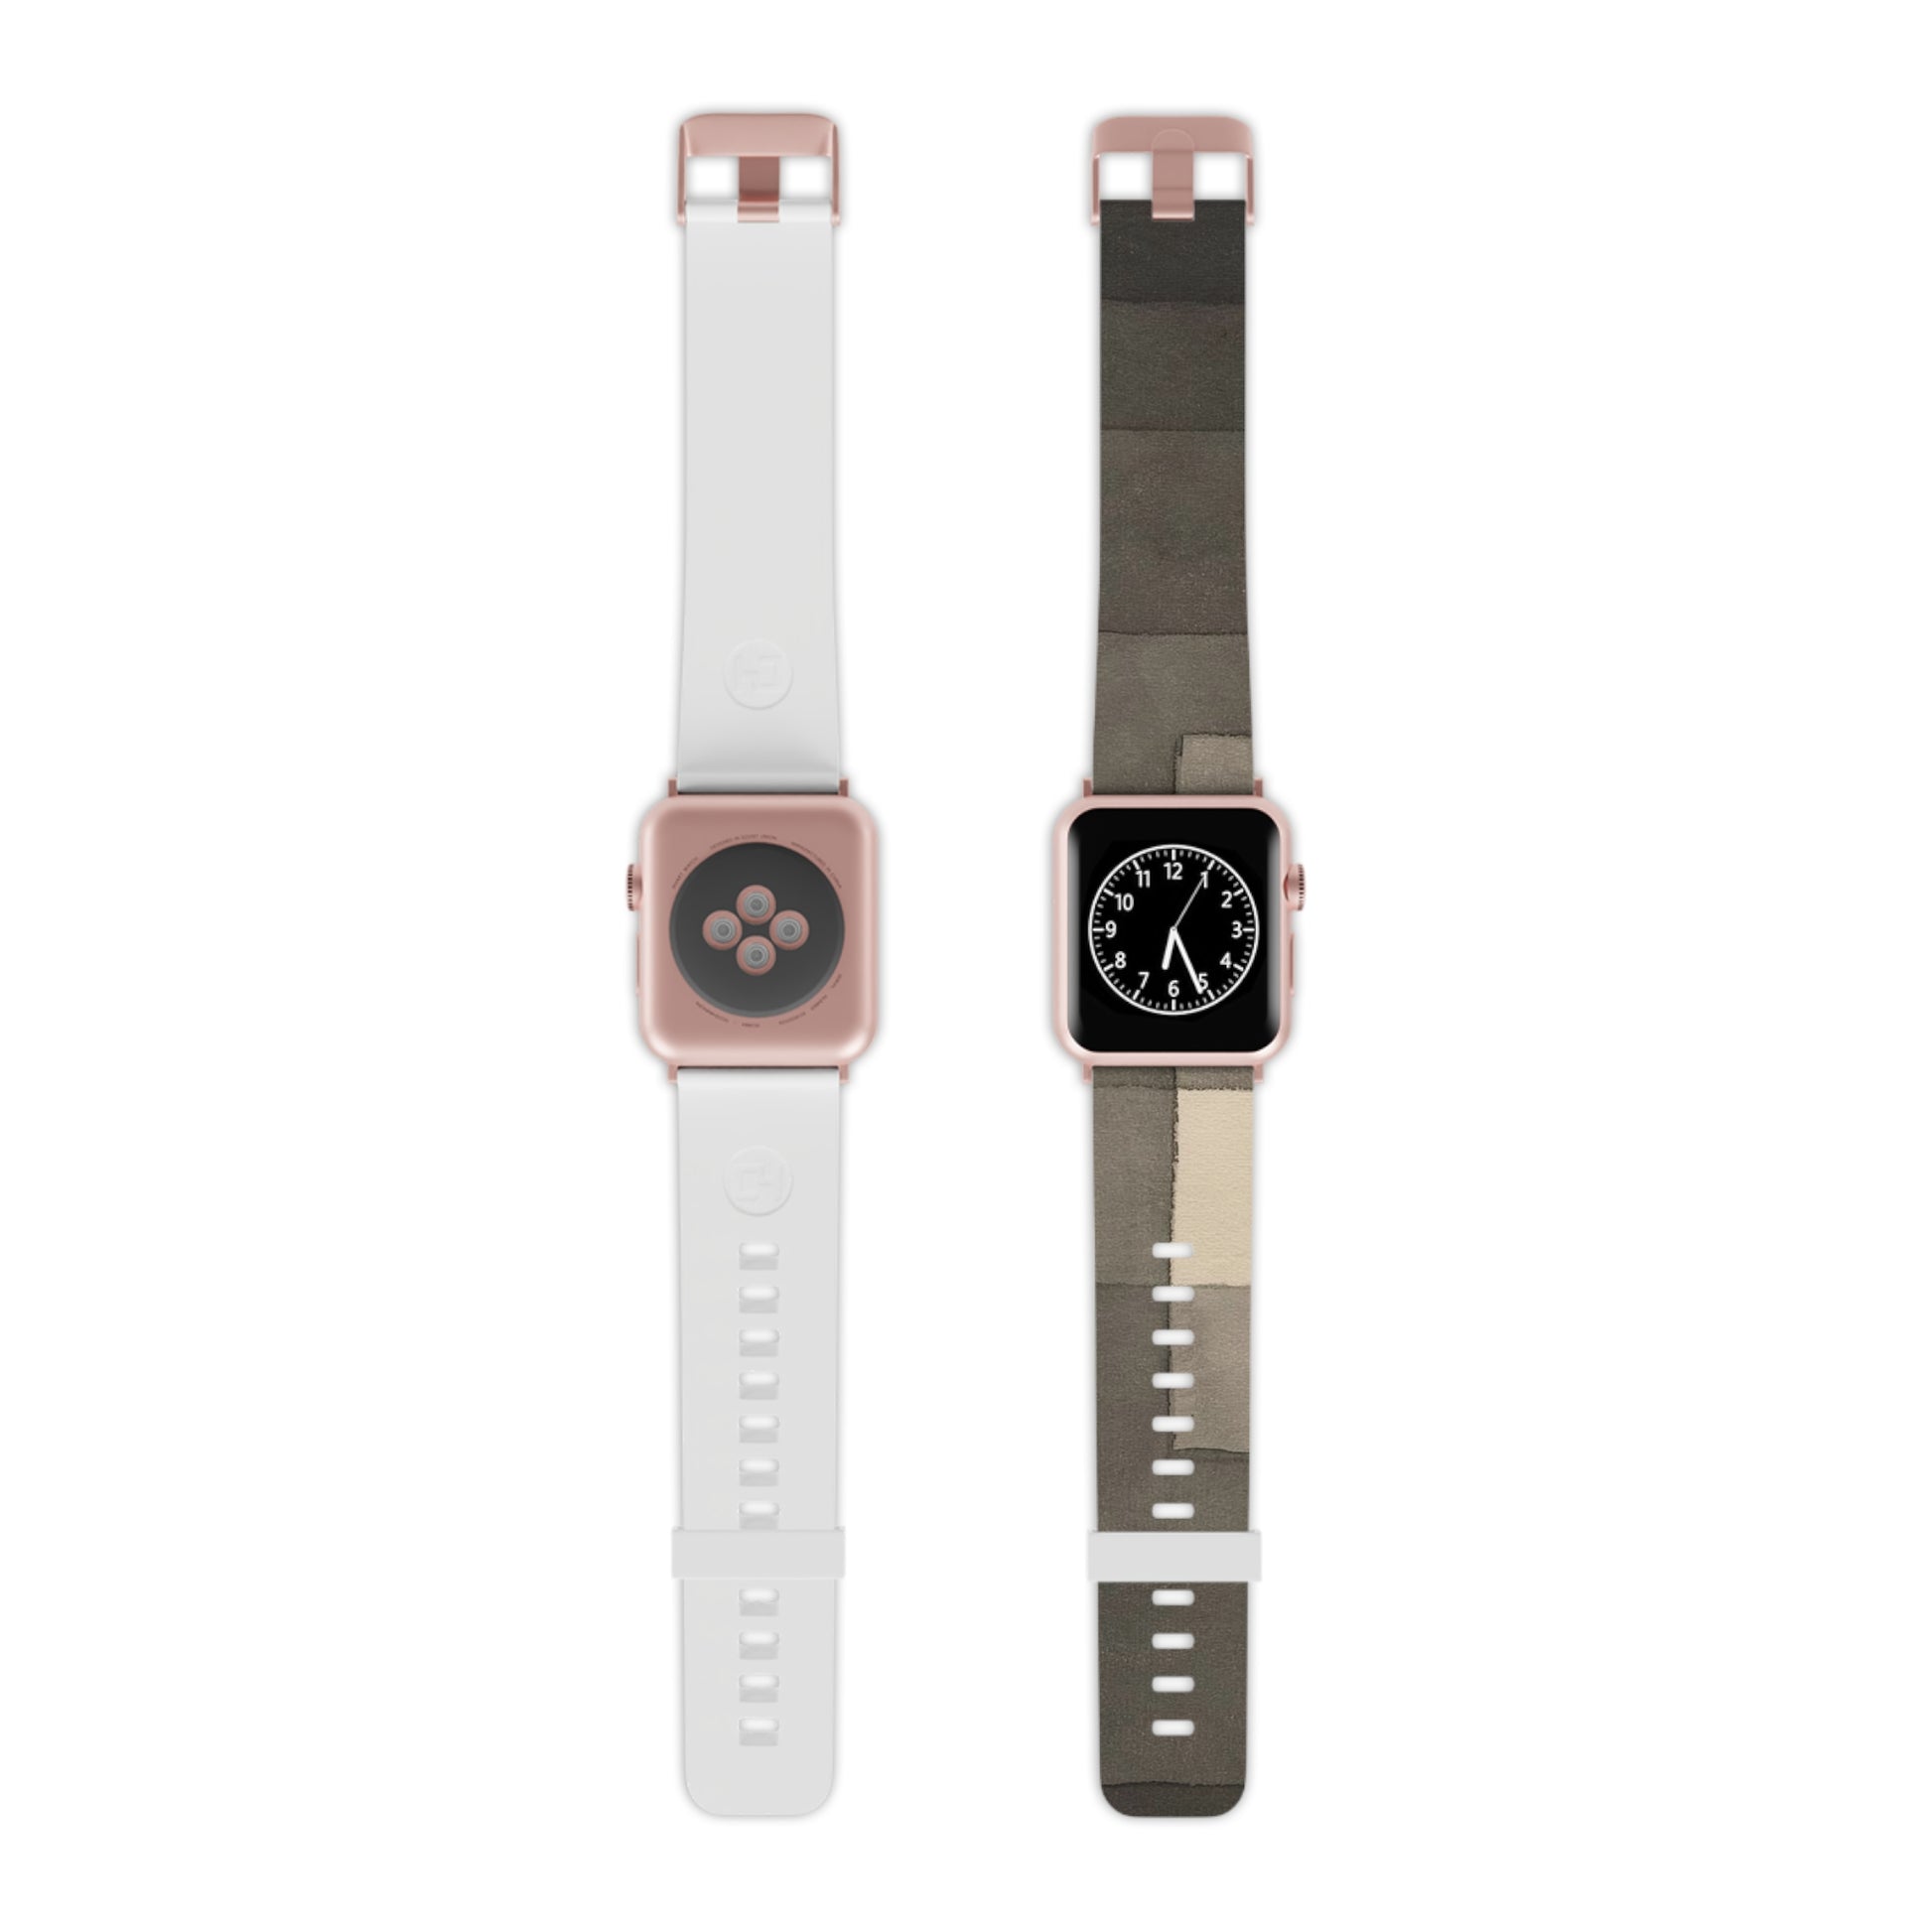 PAUL KLEE - TWO WAYS - ART WATCH BAND FOR APPLE WATCH